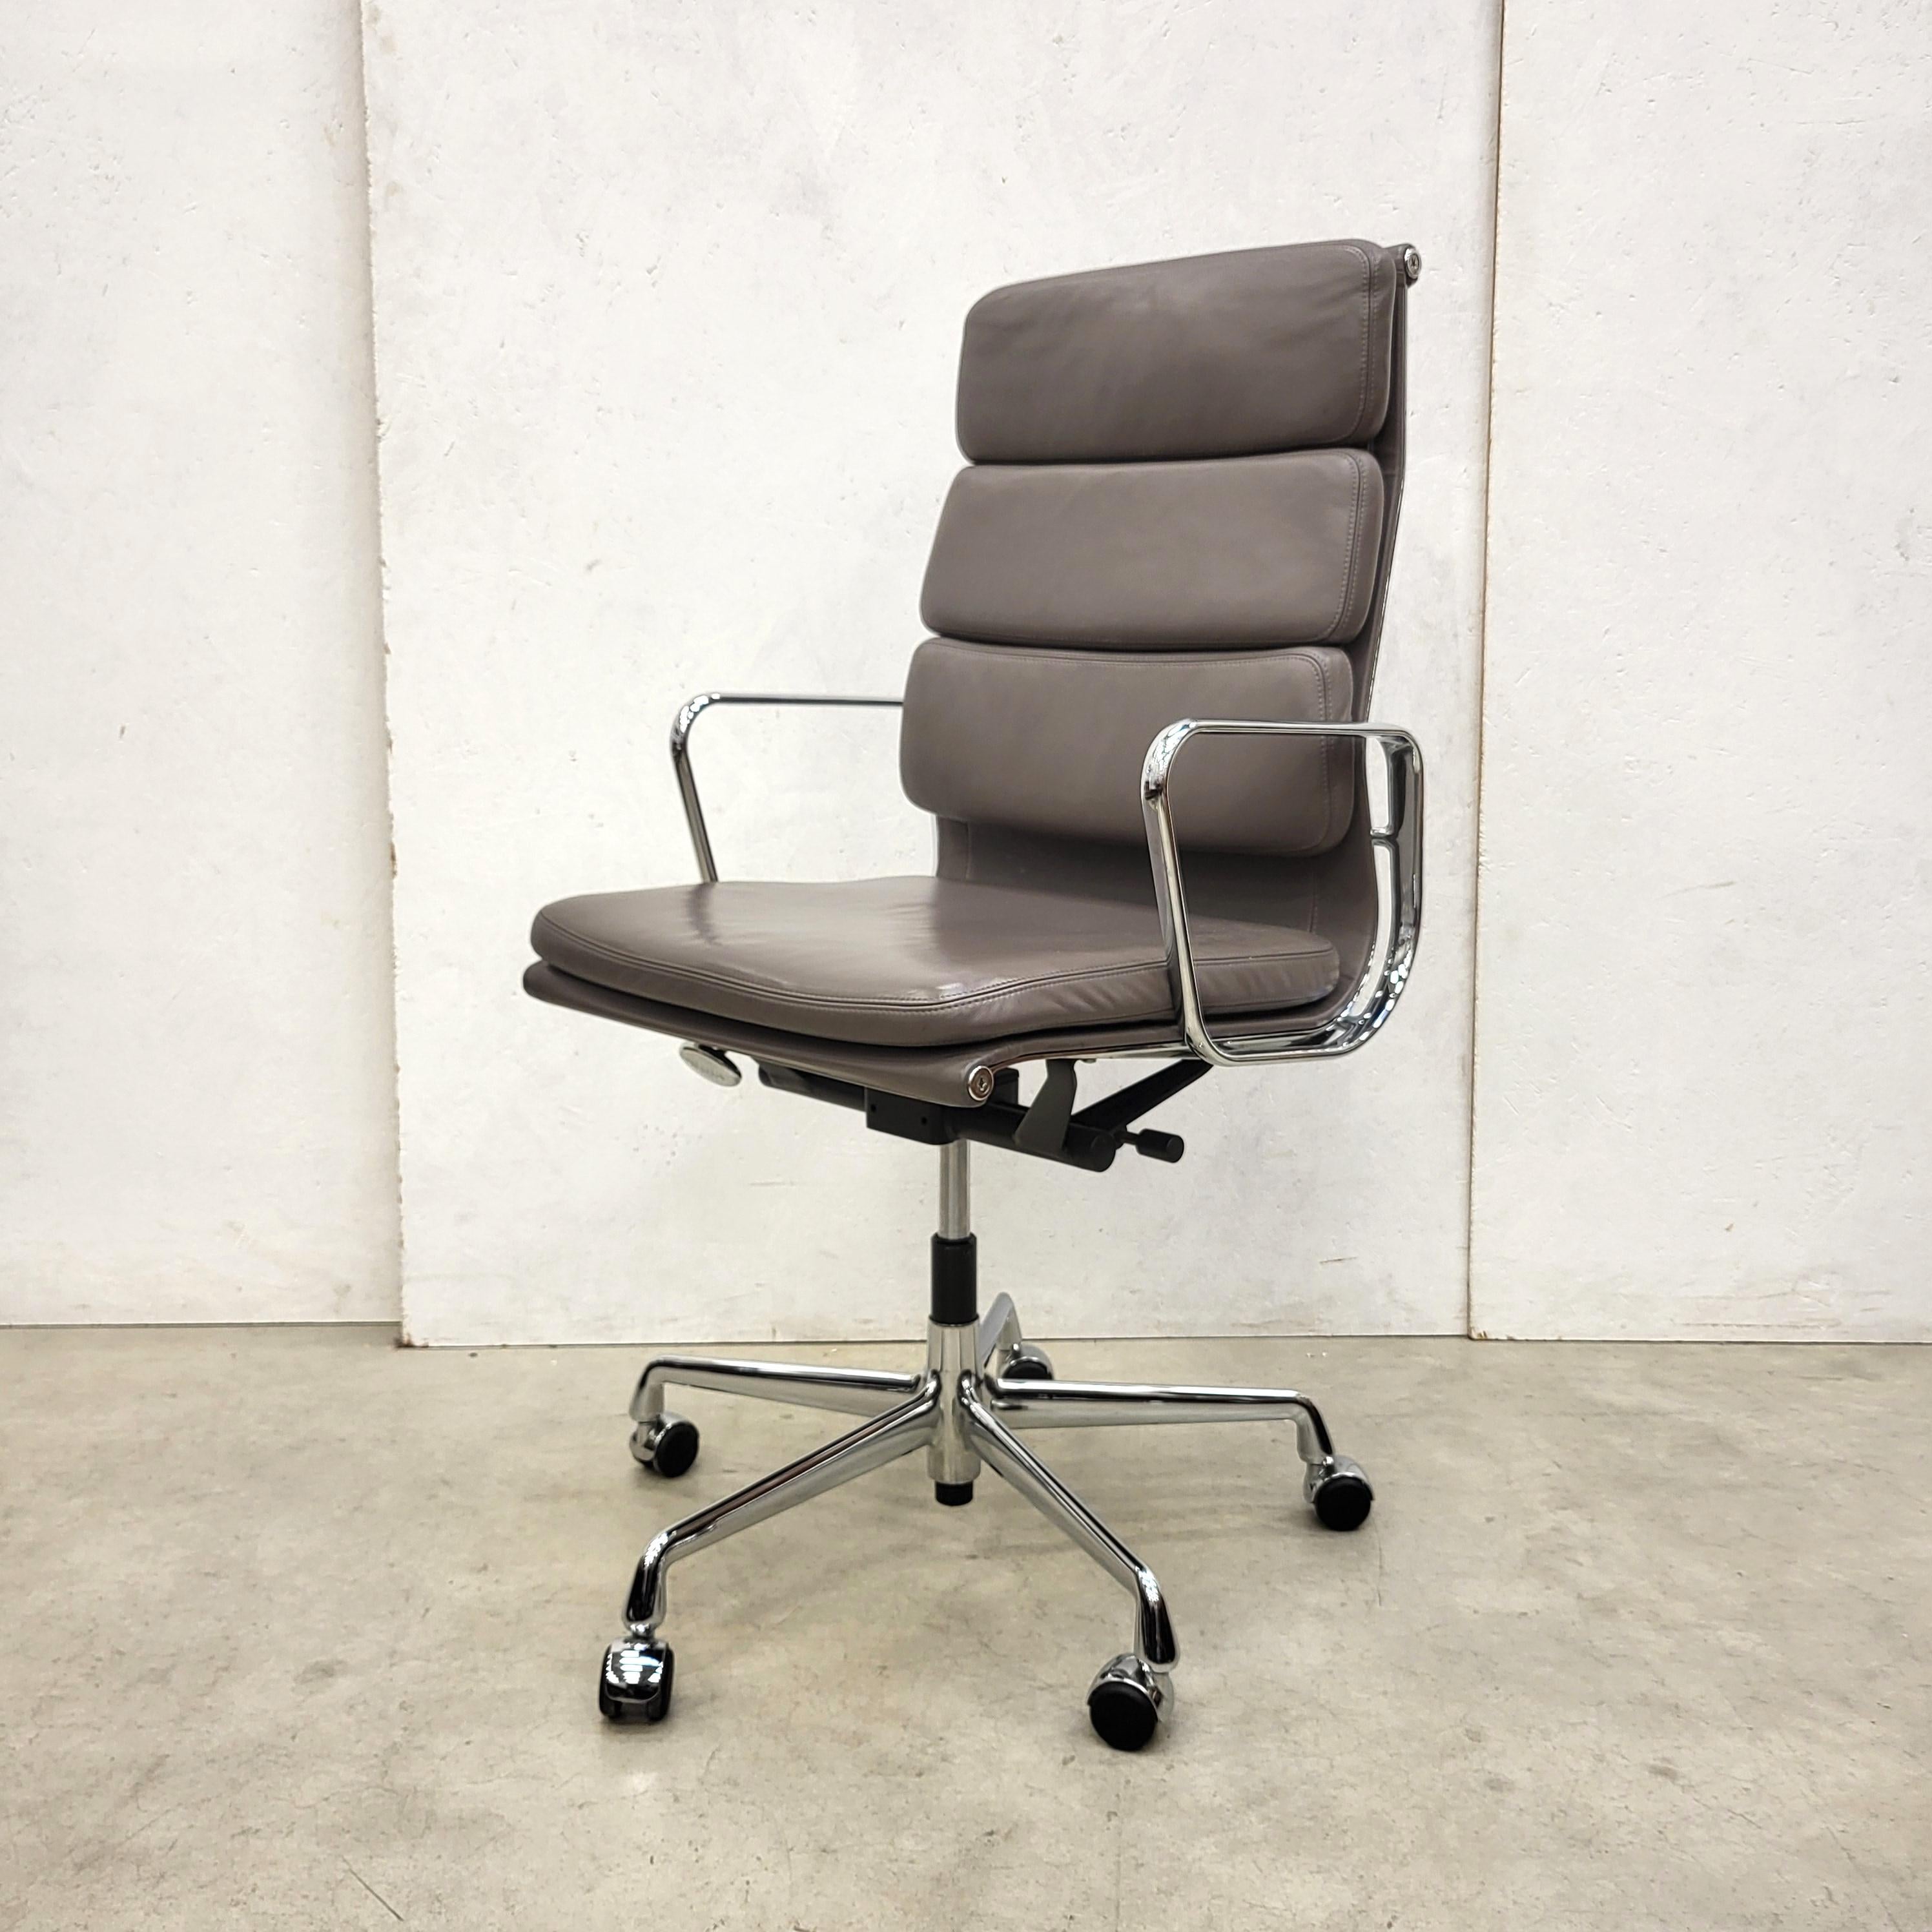 Taupe Brown Vitra EA219 Soft Pad Office Chair von Charles Eames, 2012 (amerikanisch)